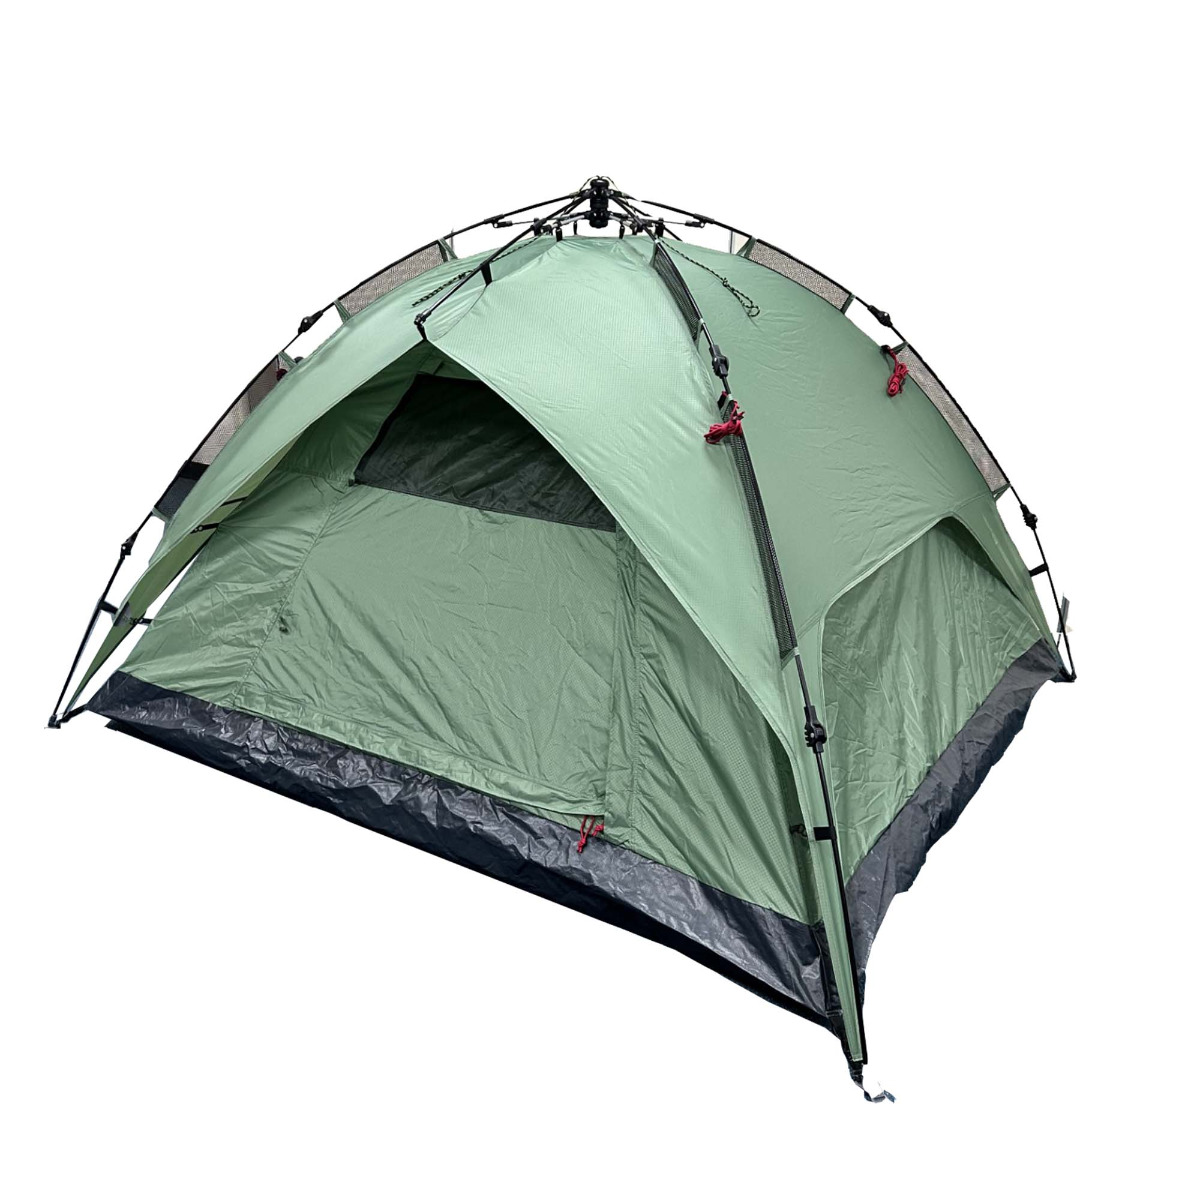 HI-COUNTRY 3P QUICK-UP TENT